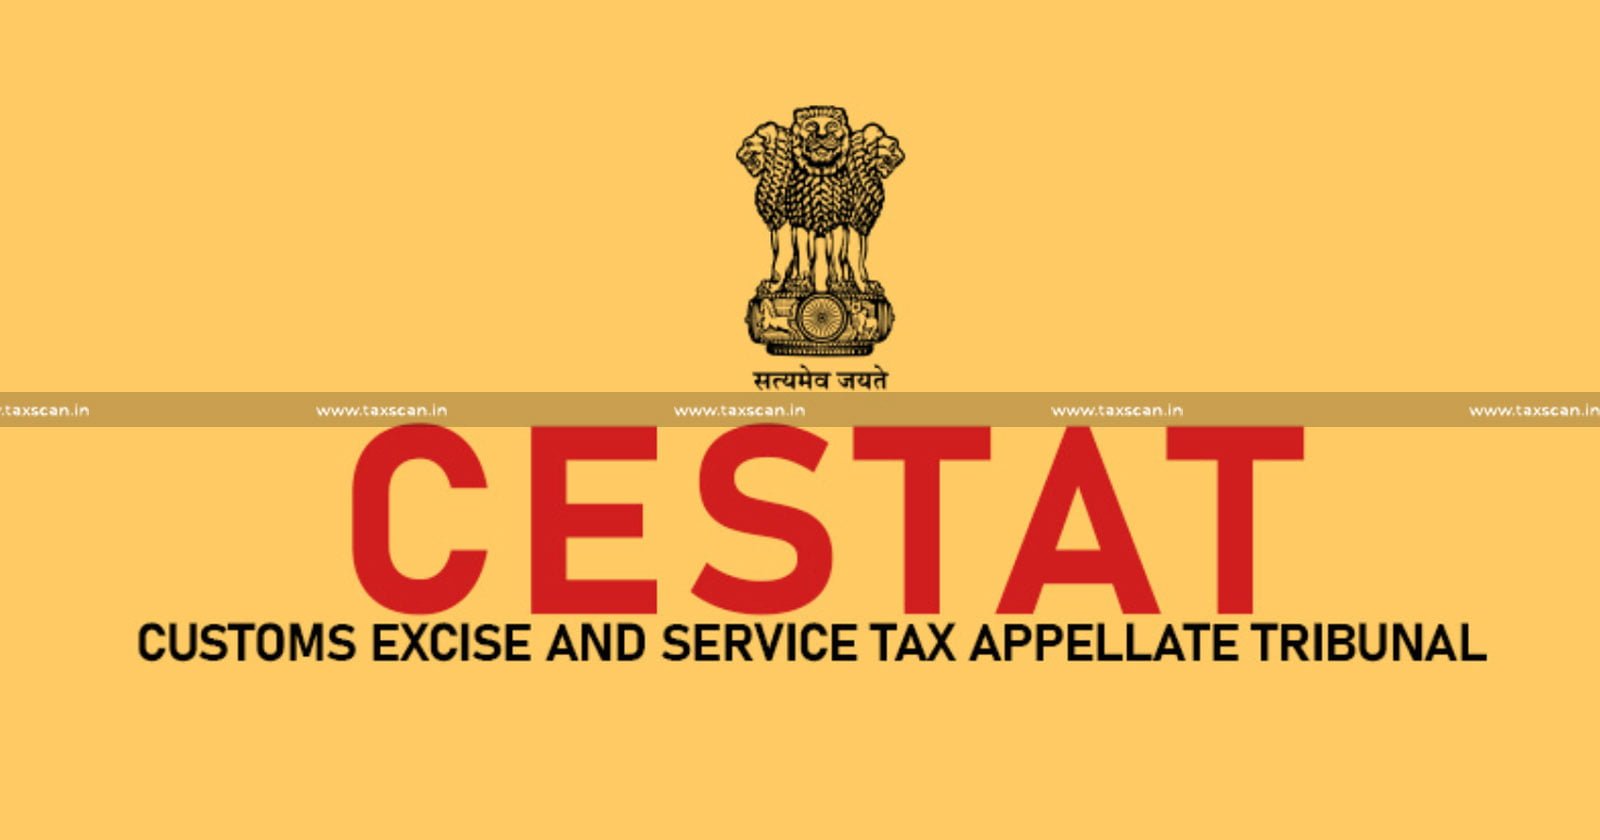 Service Tax Rules - CESTAT directs - Issue Refund Cheque - CESTAT - TAXSCAN